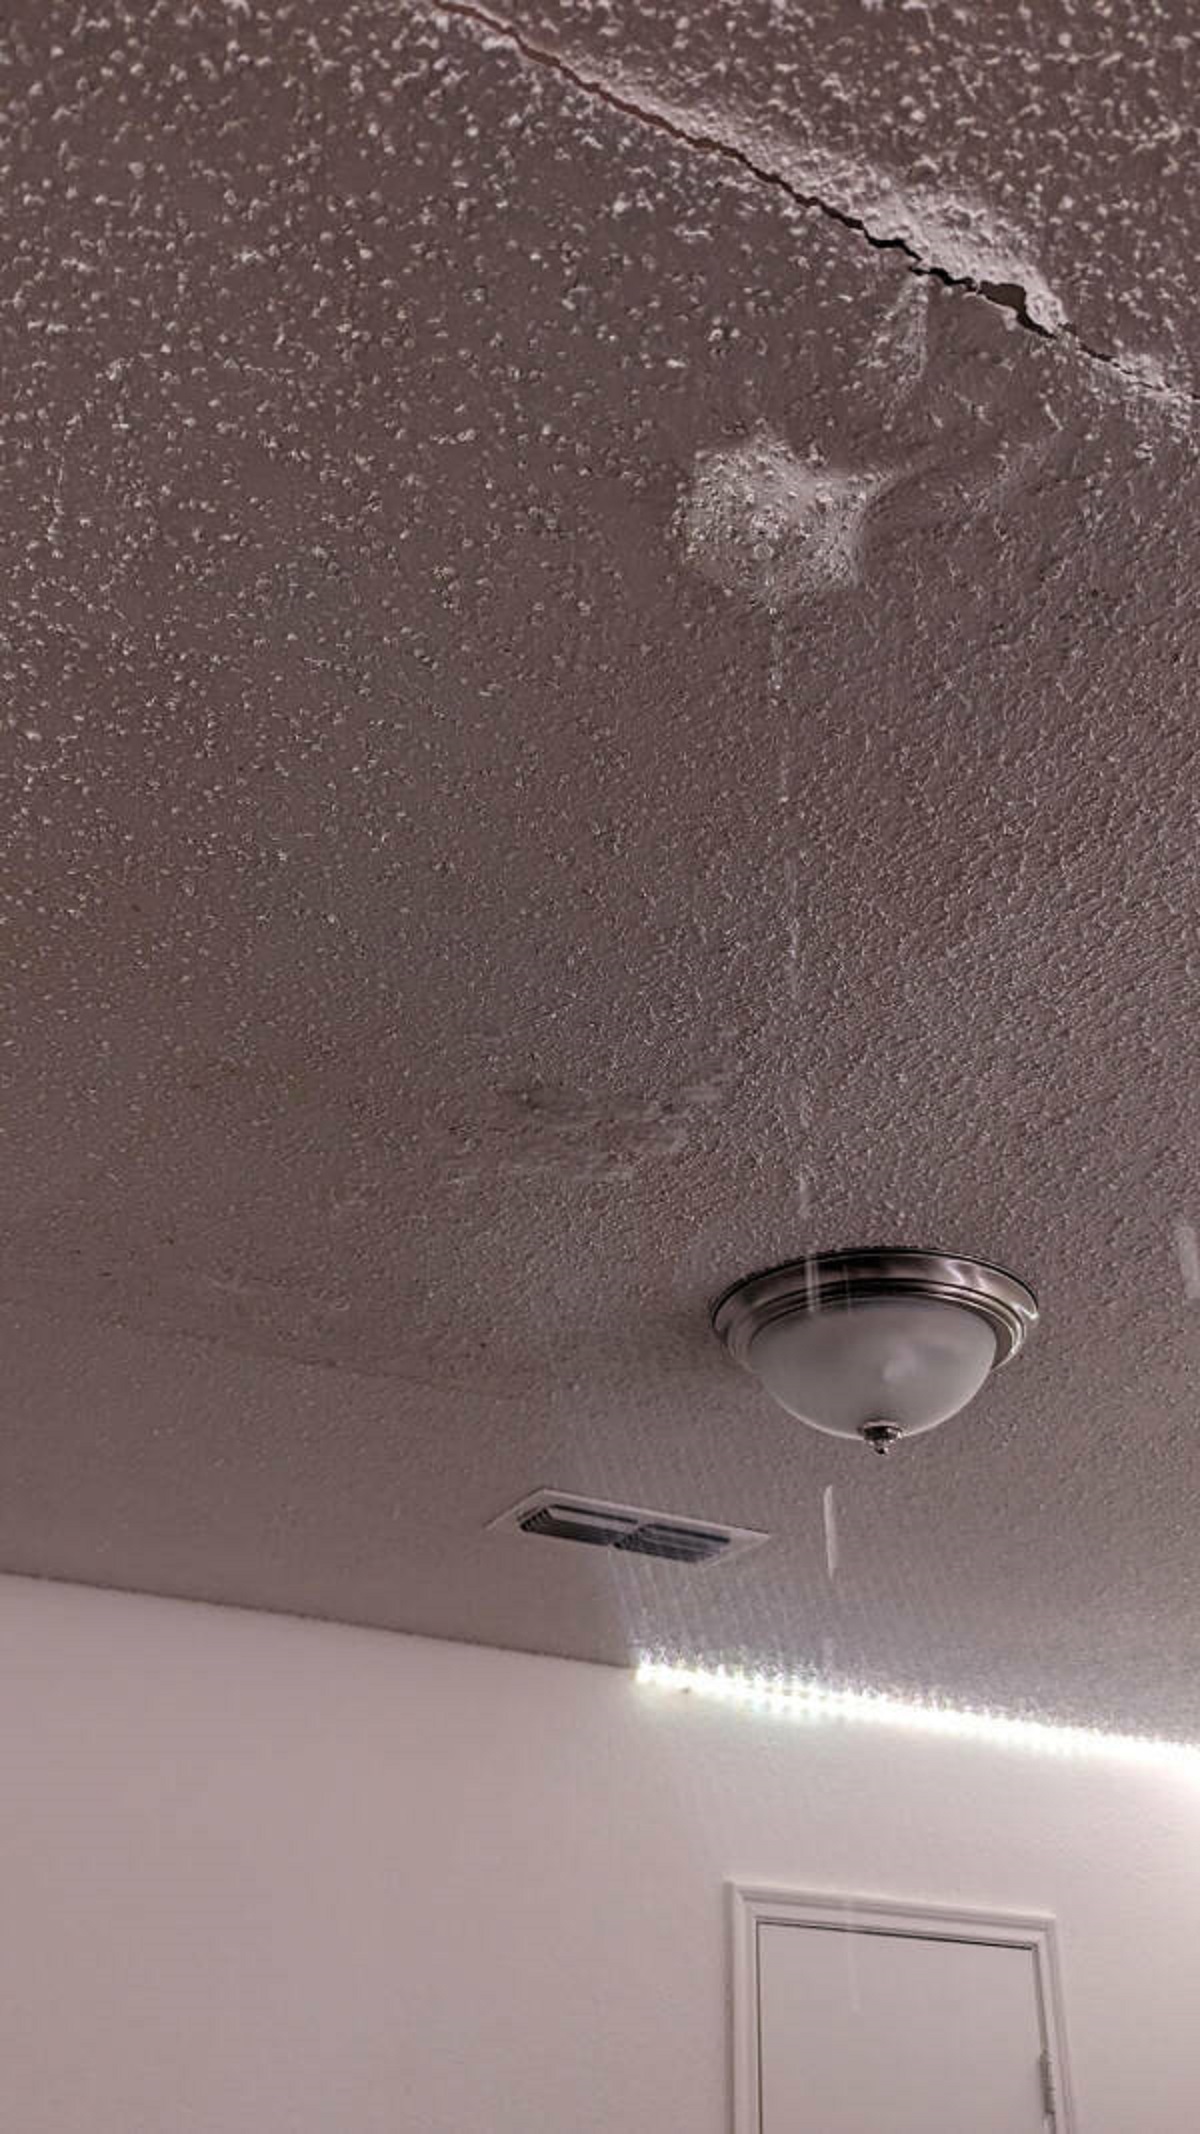 “My roof was struck by lightning tonight and now water is leaking into my attic. Sheetrock beginning to sag in my kids room. Been up since 0330 getting everything moved out of that room before the ceiling gives way. Rain is forecasted all morning.”